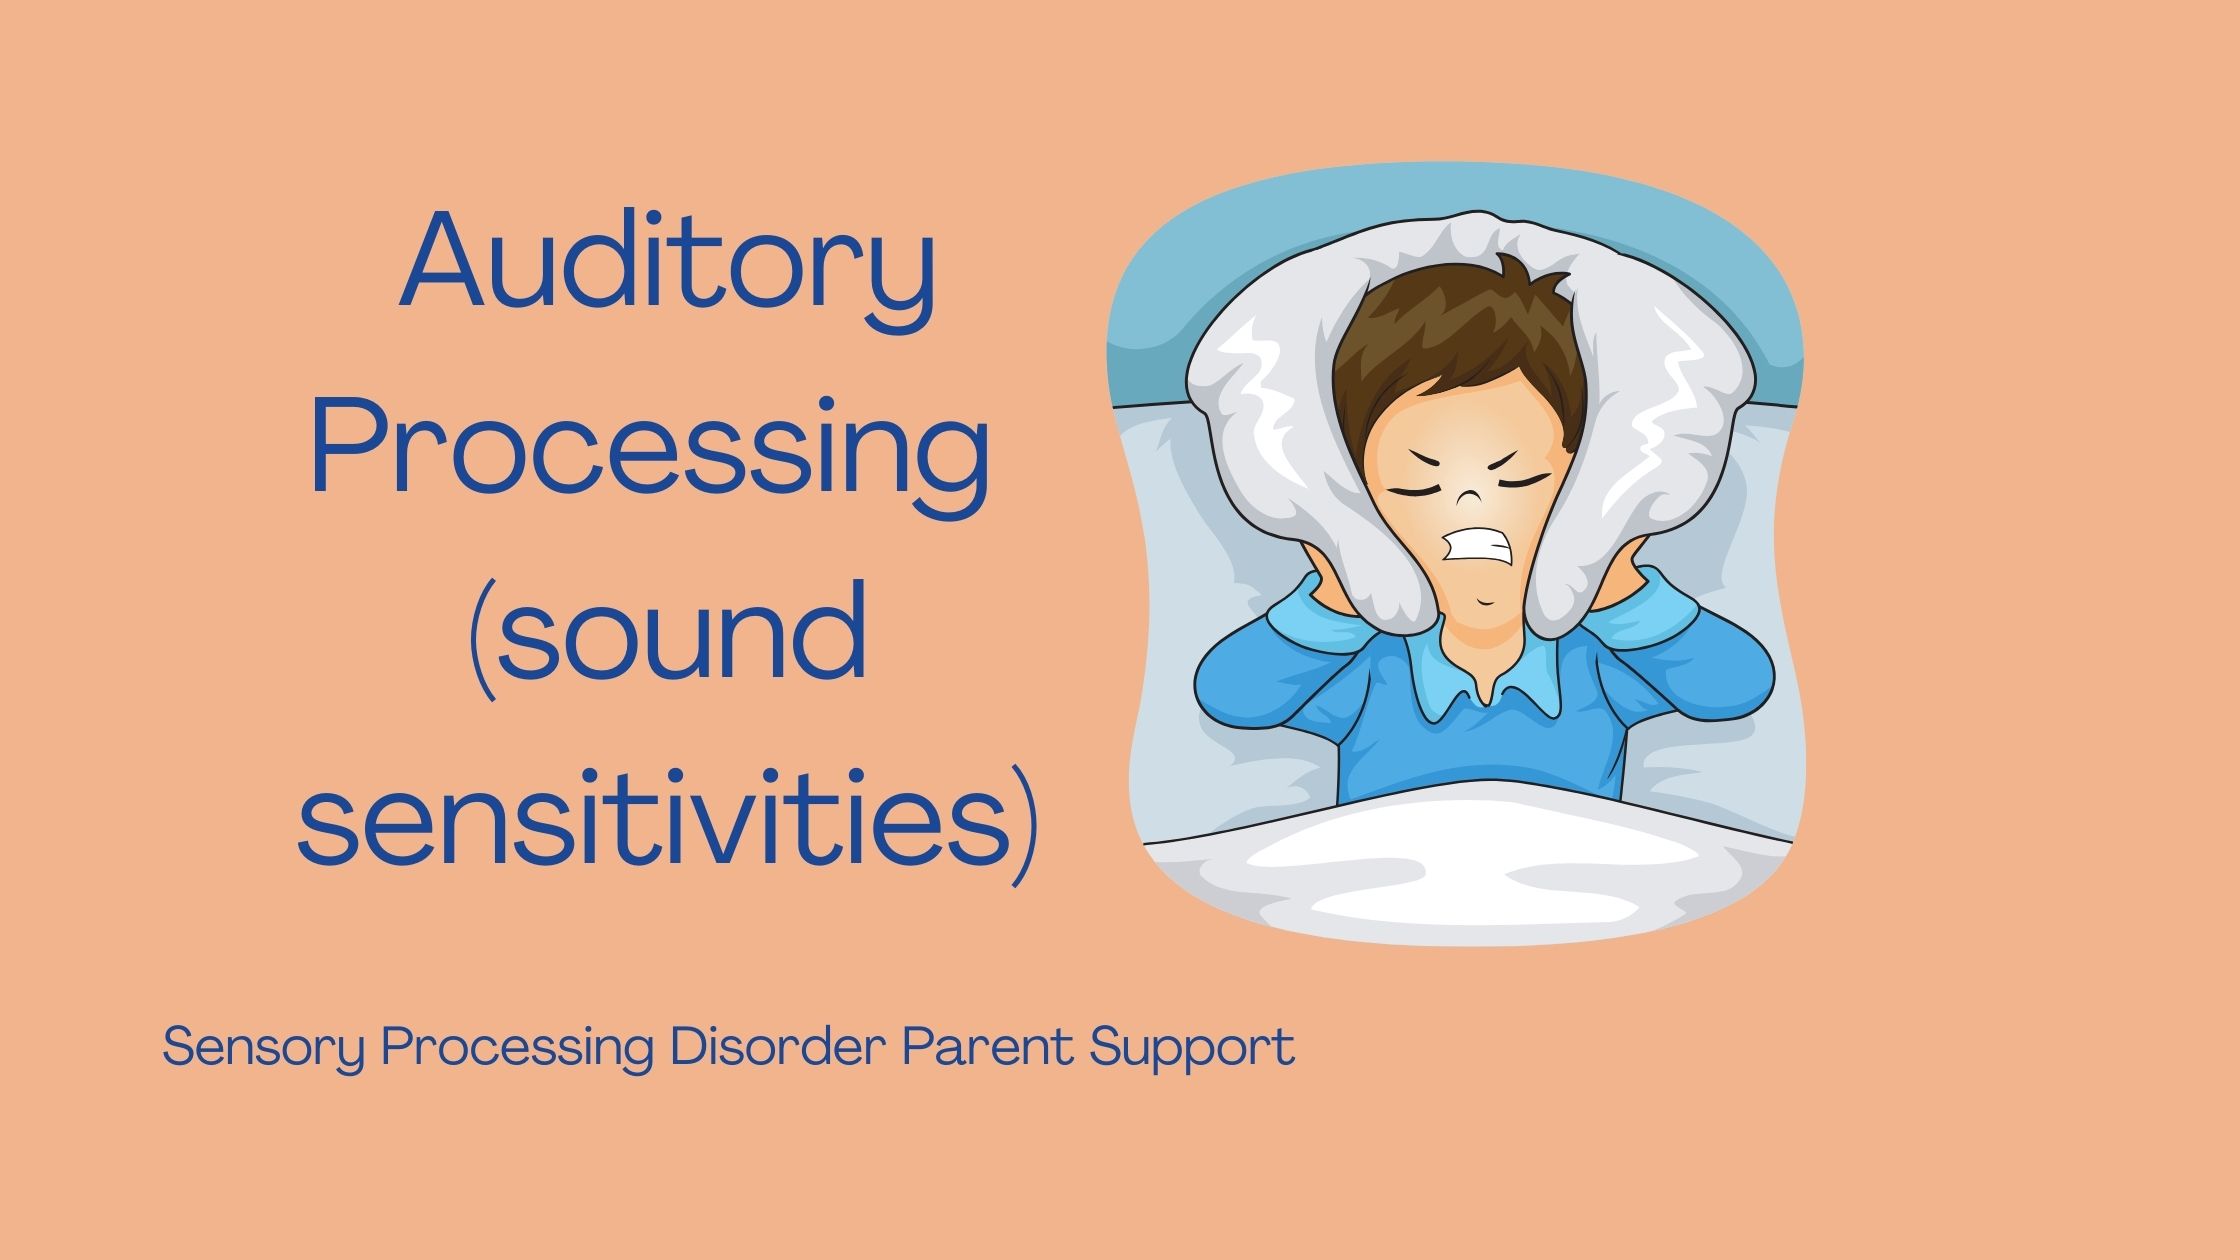 child with sensory processing disorder struggling with auditory processing covering his ears Auditory Processing  (sound sensitivities)